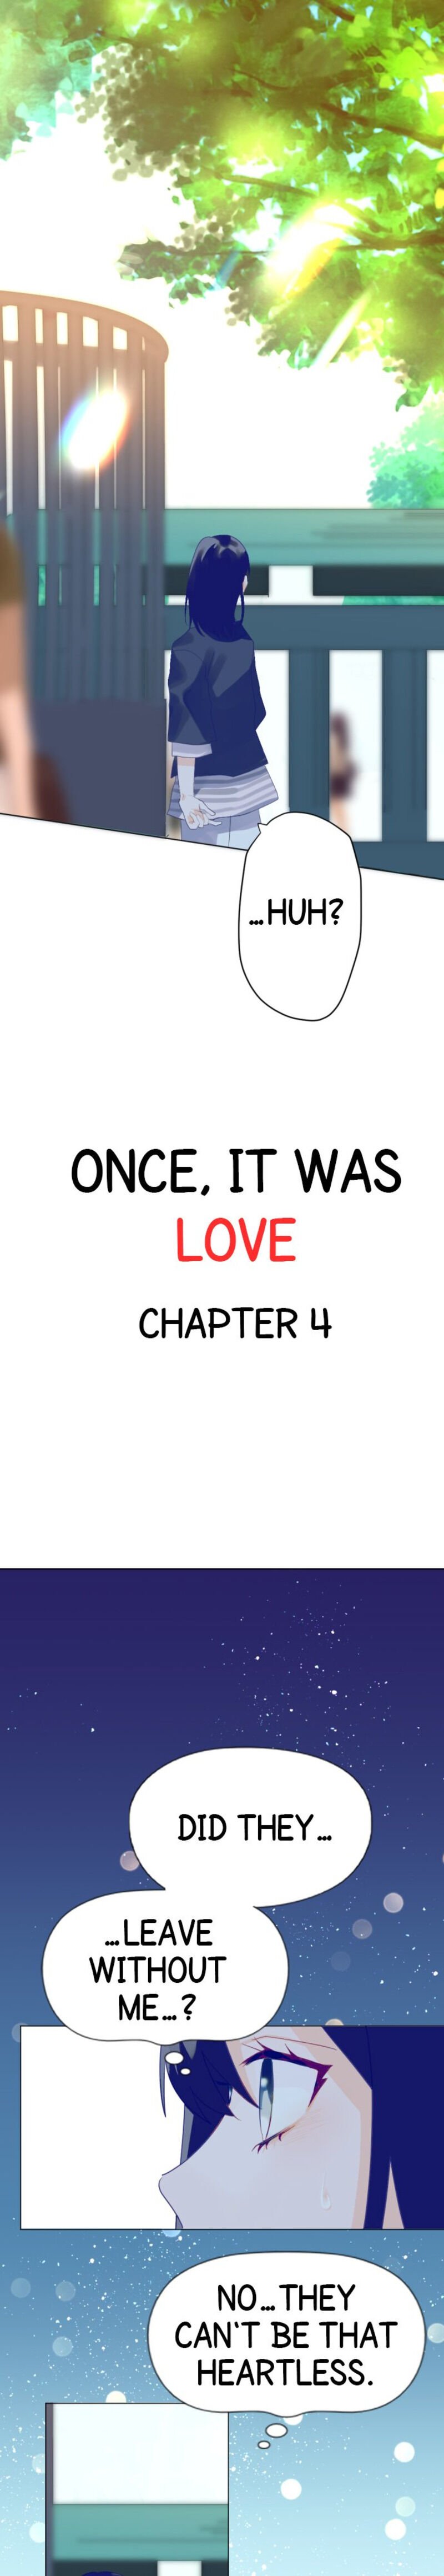 Once, It Was Love chapter 4